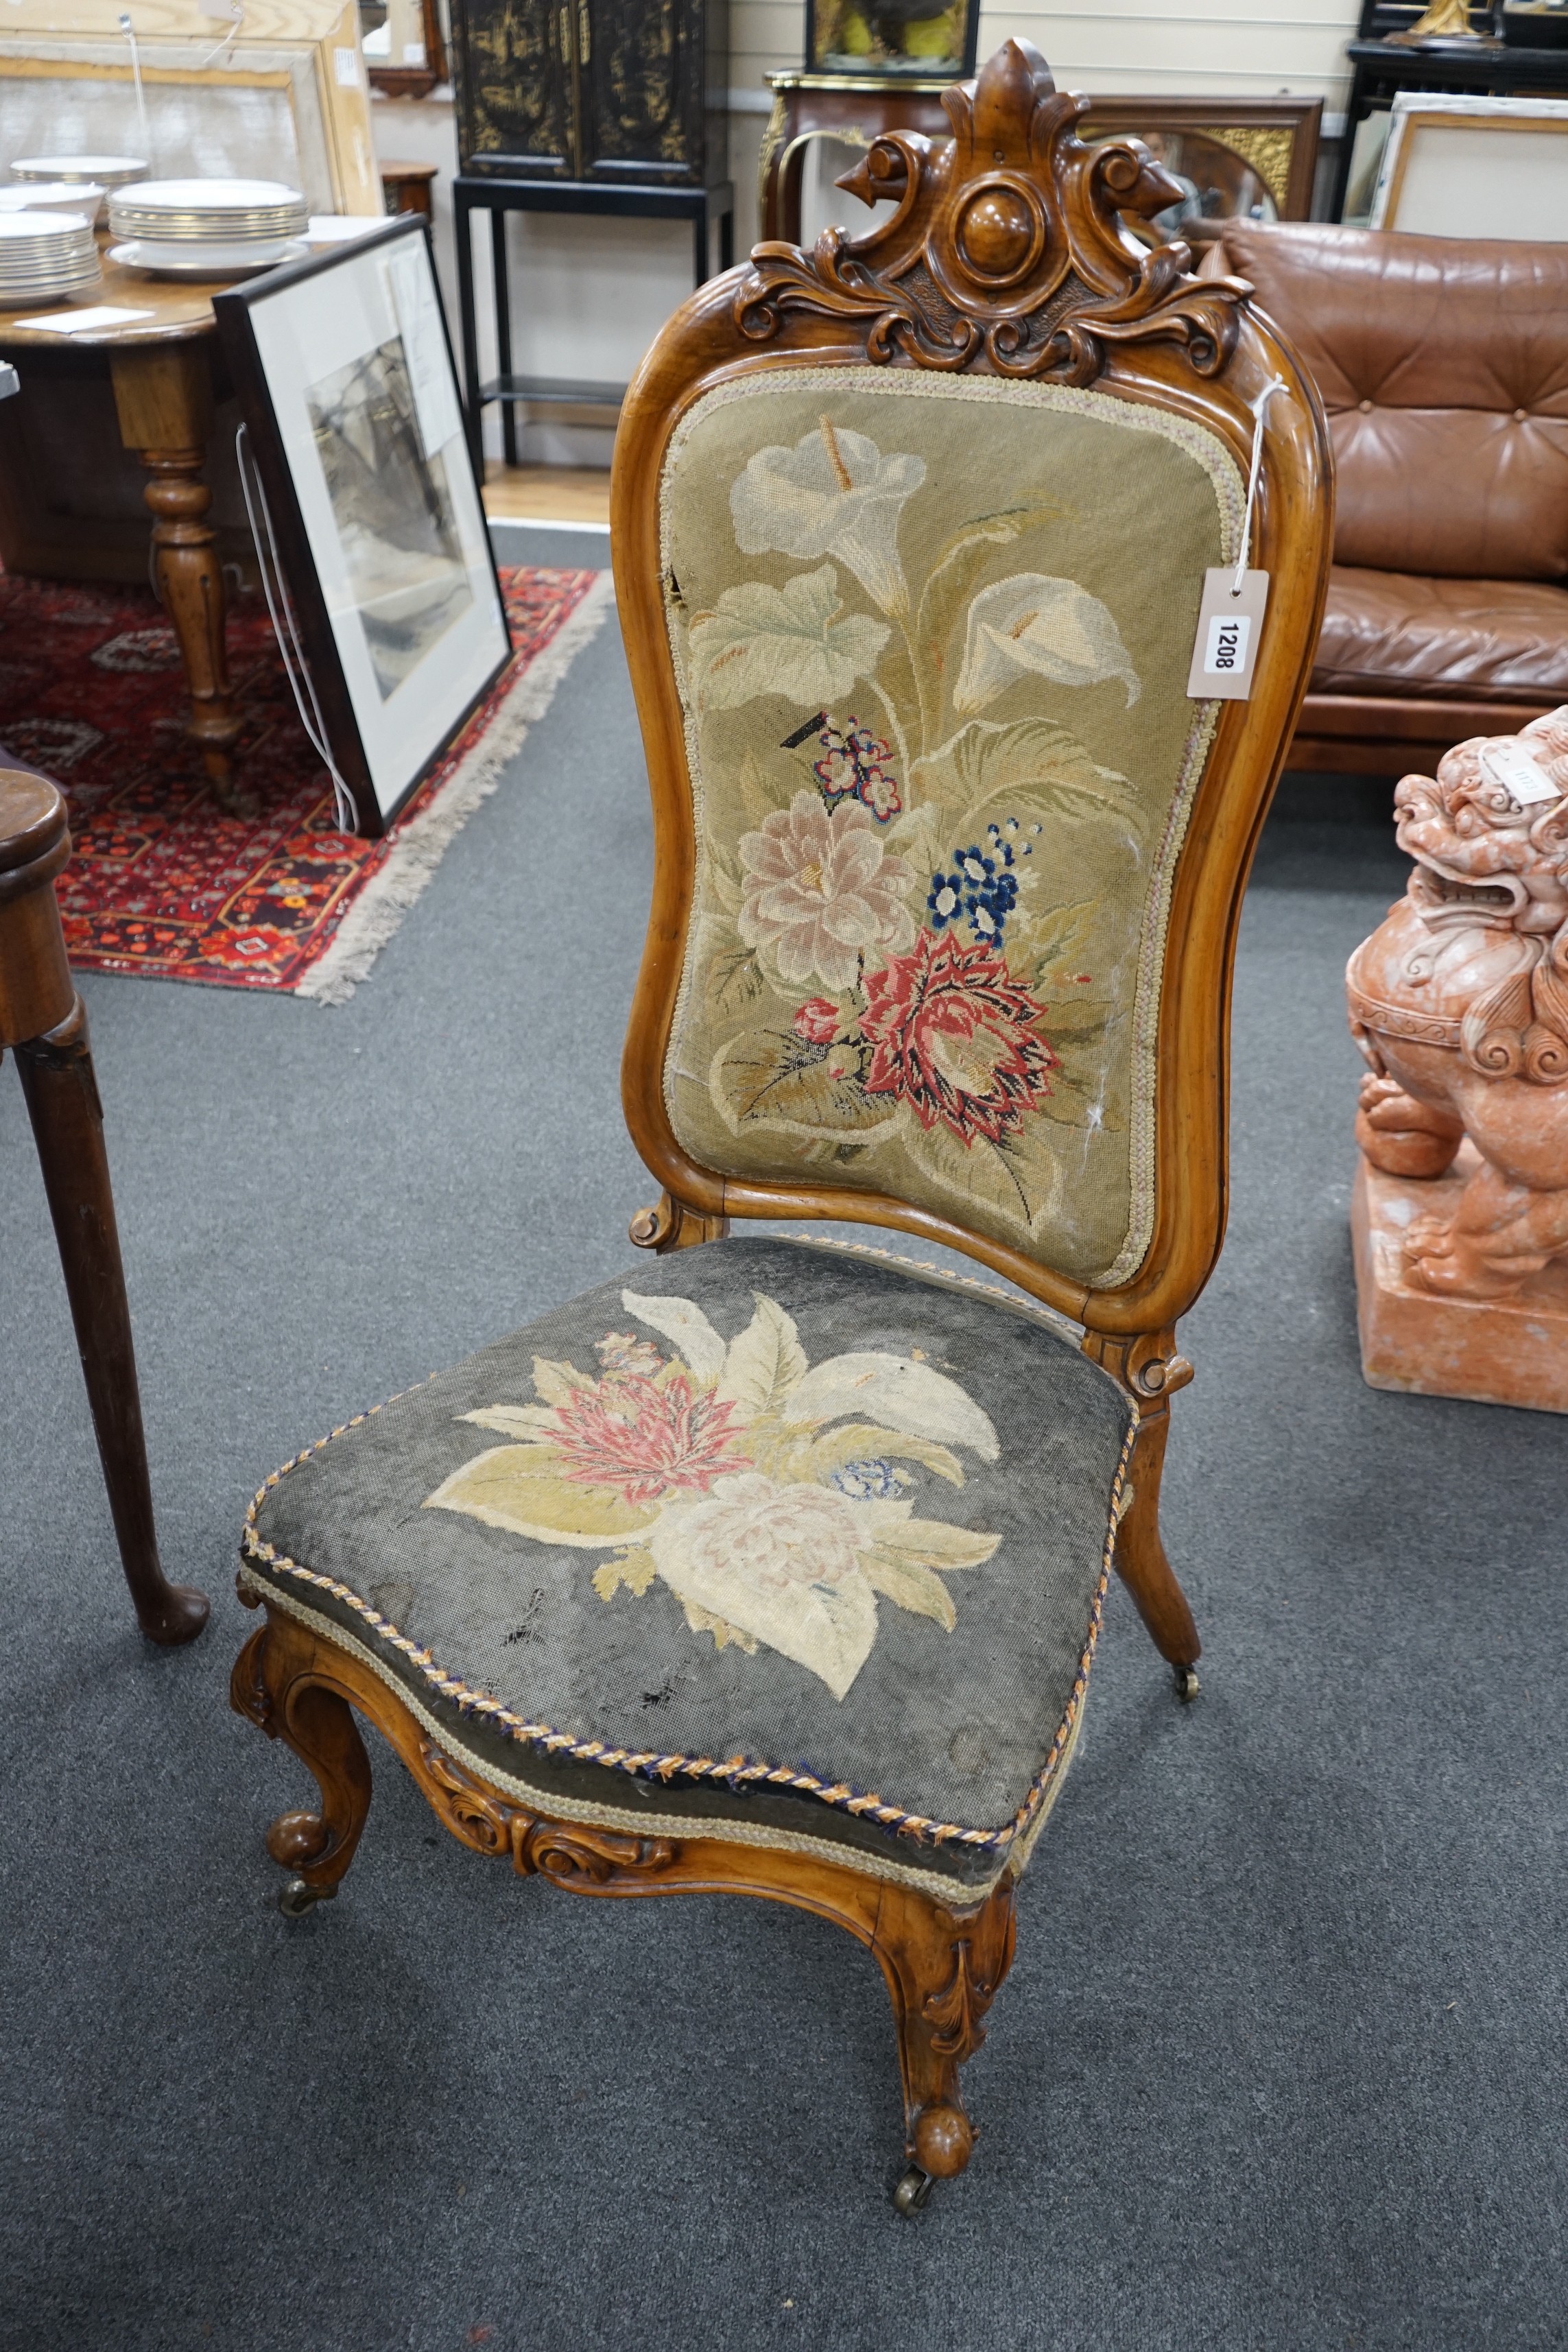 A Victorian carved walnut nursing chair with floral embroidered upholstery, height 112cm